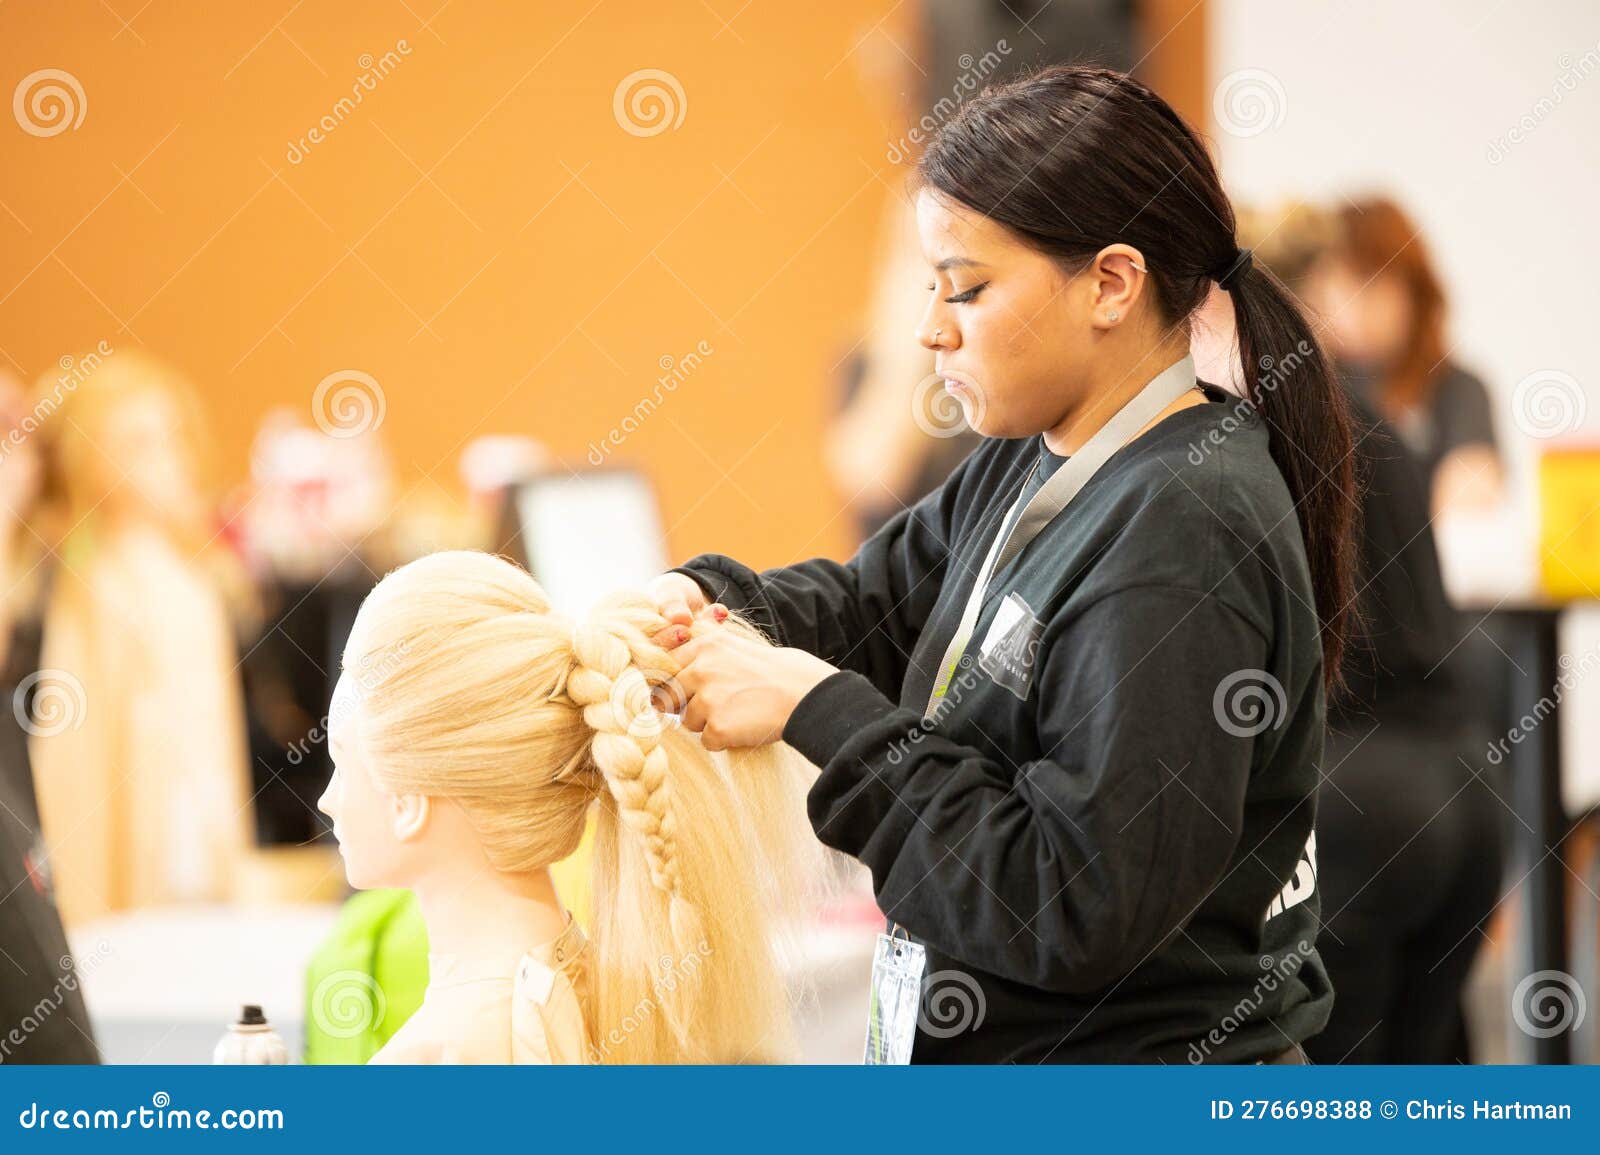 https://thumbs.dreamstime.com/z/saskatchewan-skills-canada-competition-hairstyling-braiding-secondary-post-secondary-students-across-provice-came-276698388.jpg